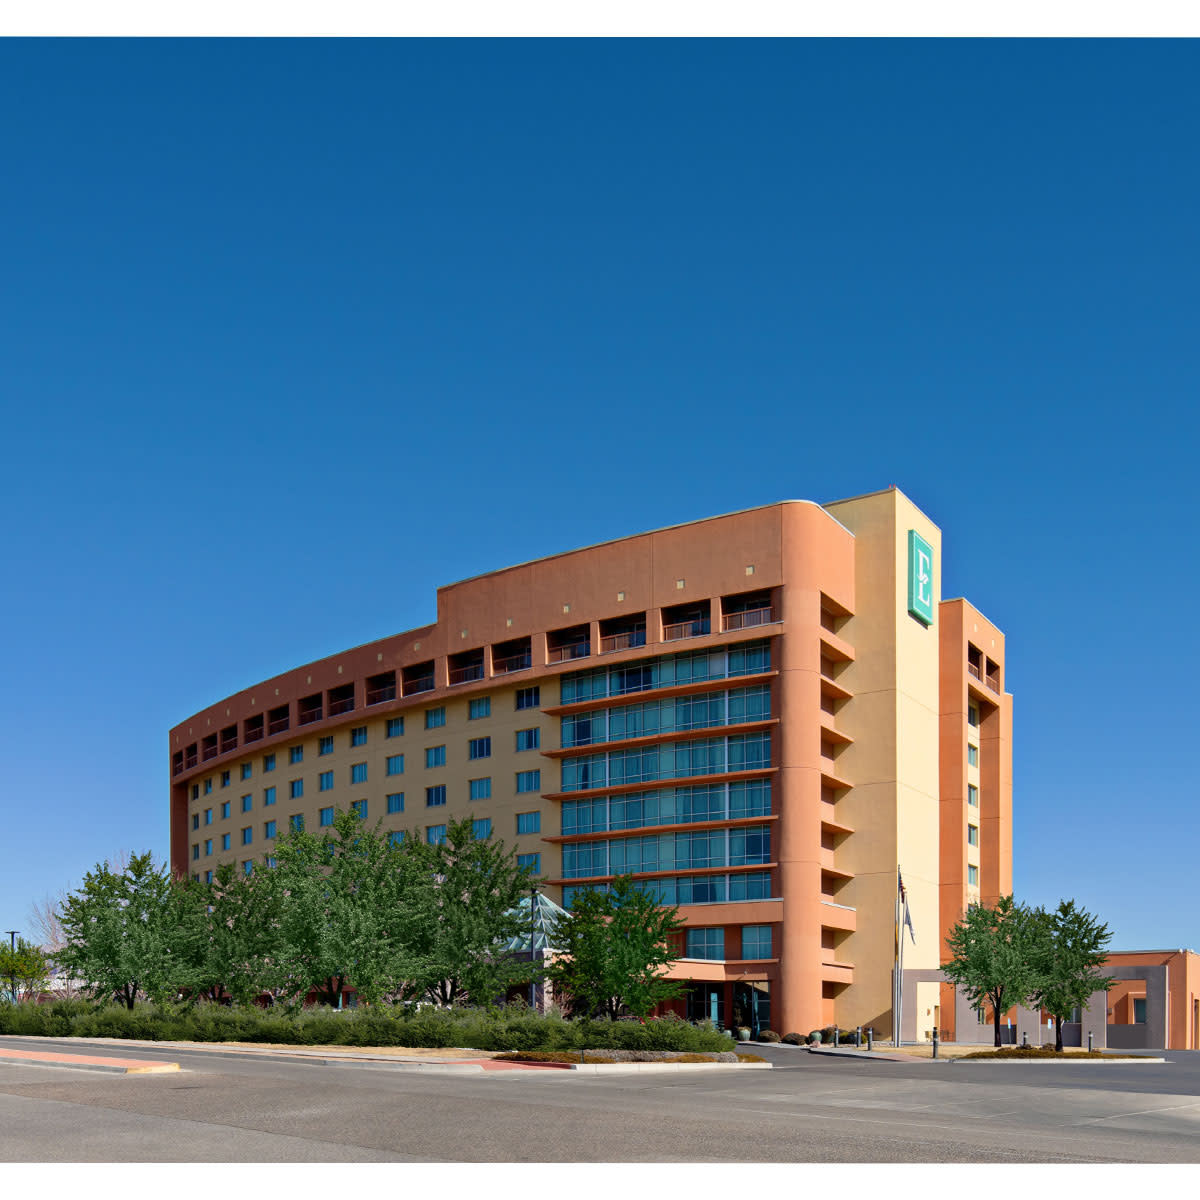 Embassy Suites- East Peoria, IL Hotels- First Class Hotels in East Peoria-  GDS Reservation Codes | TravelAge West